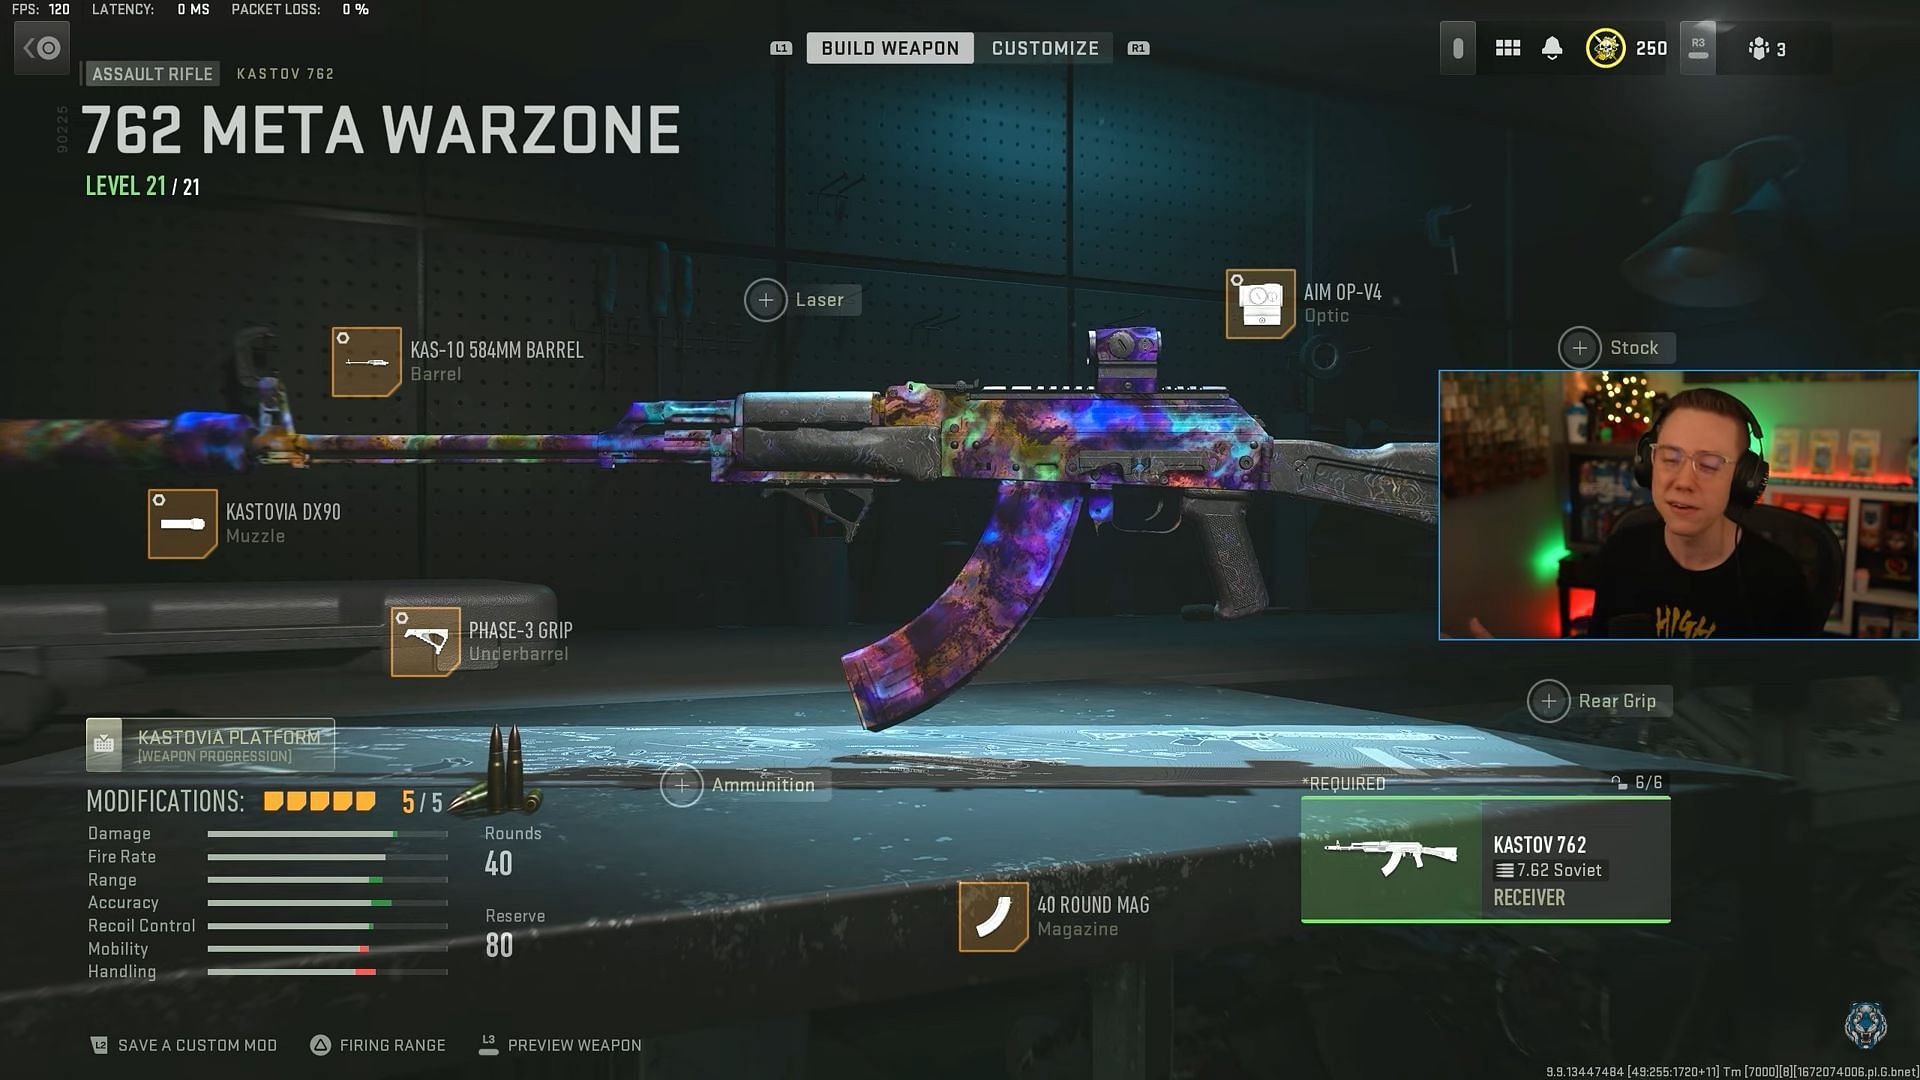 Kastov 762 loadout for Warzone 2 Season 1 Reloaded (Image via Activision and YouTube/WhosImmortal)